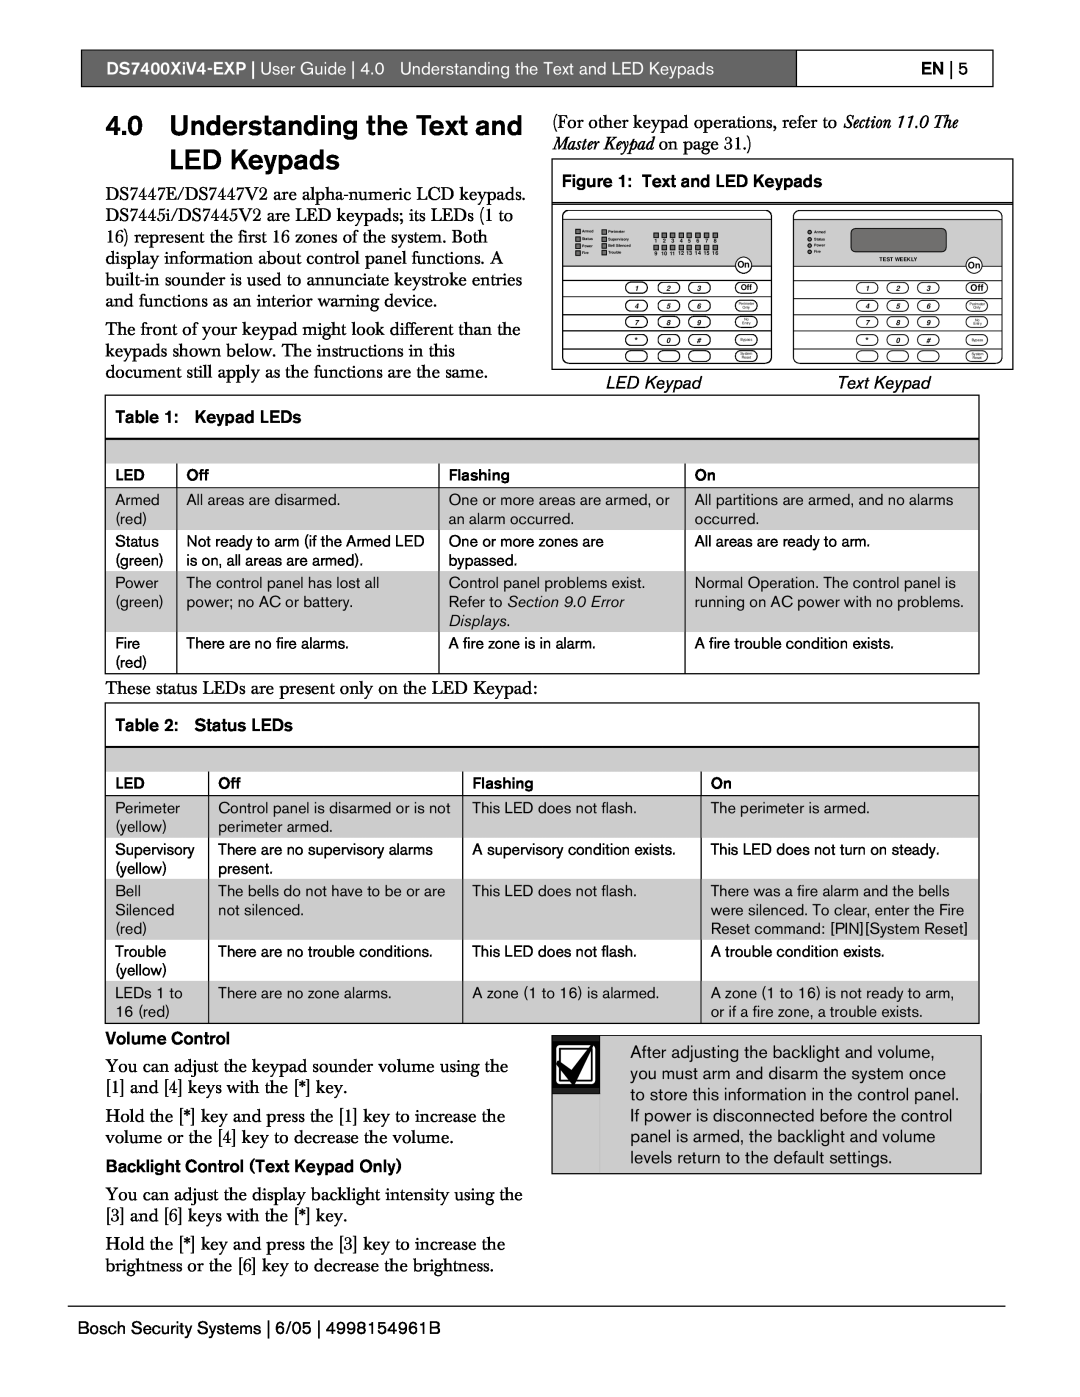 Bosch Appliances DS7400XIV4-EXP manual Understanding the Text and LED Keypads, Text Keypad 